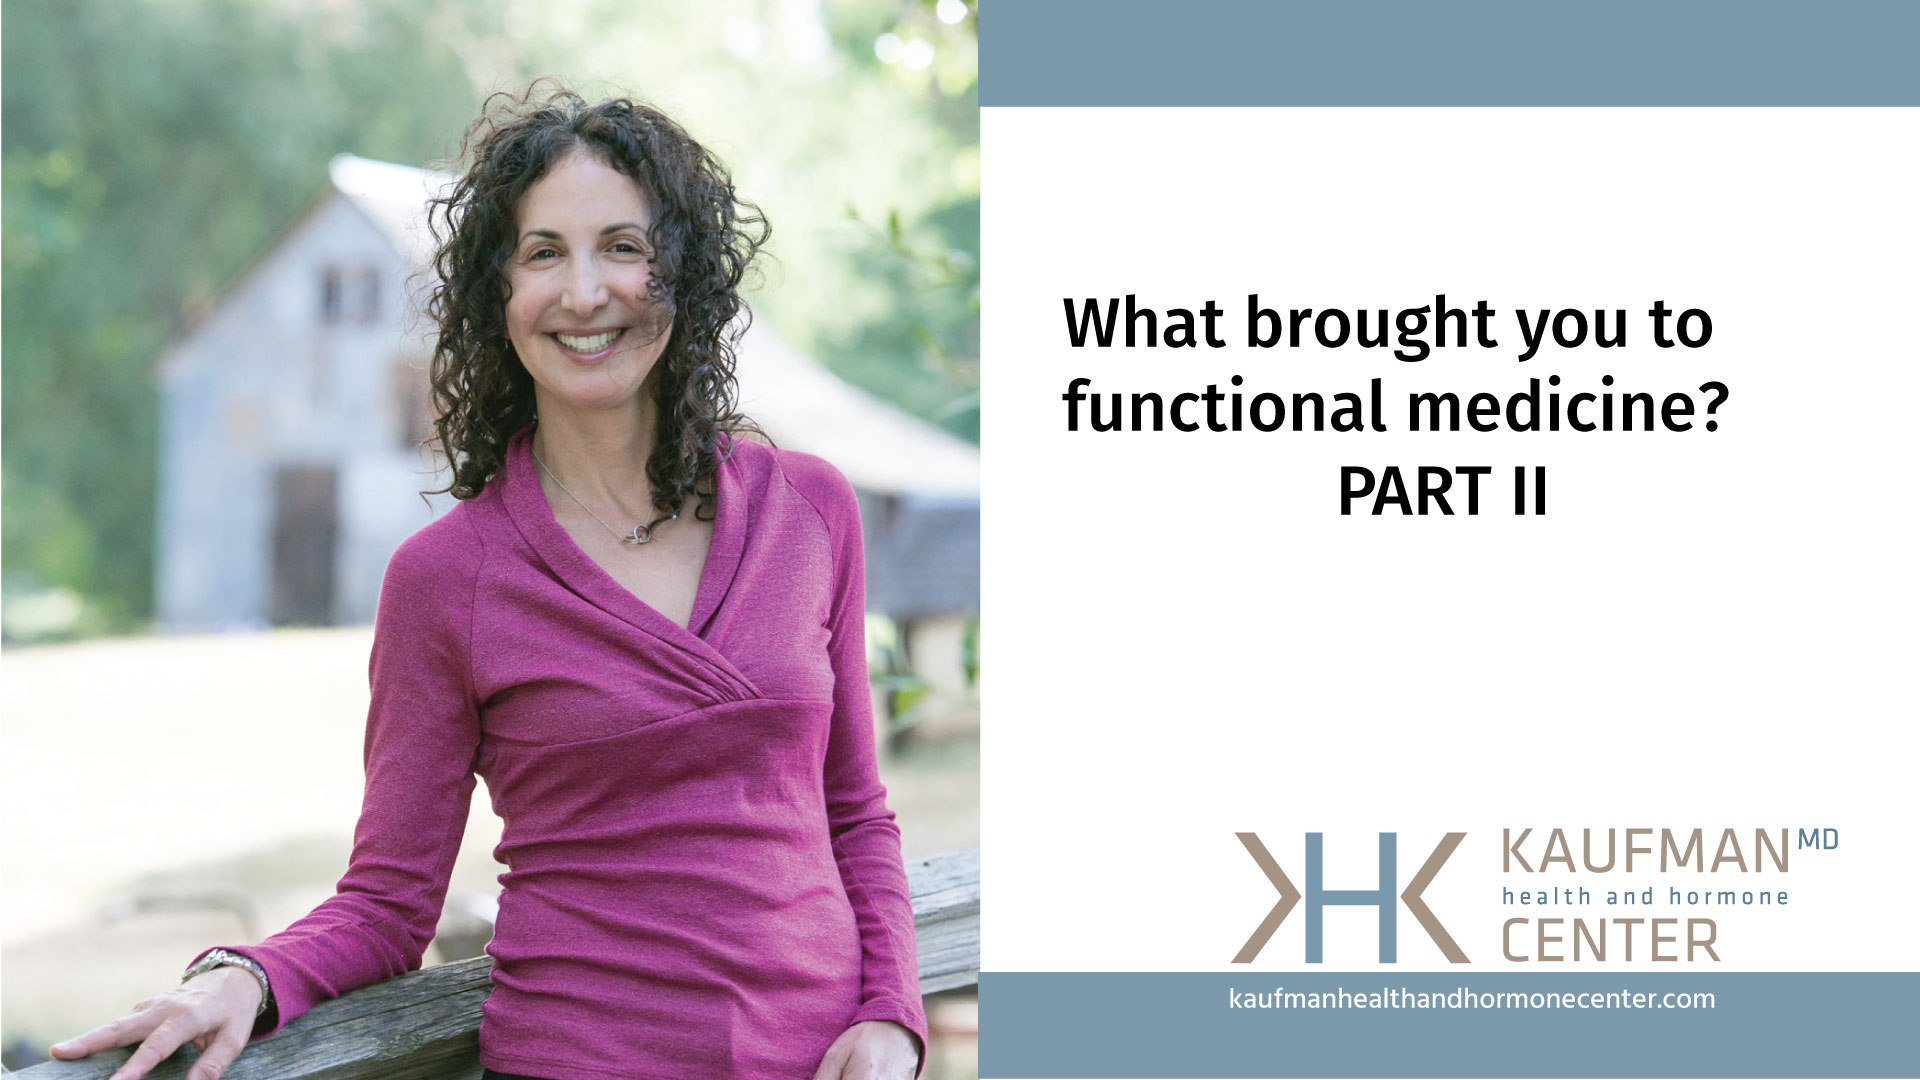 Dr. Kaufman talks about why she chose to pursue functional medicine.